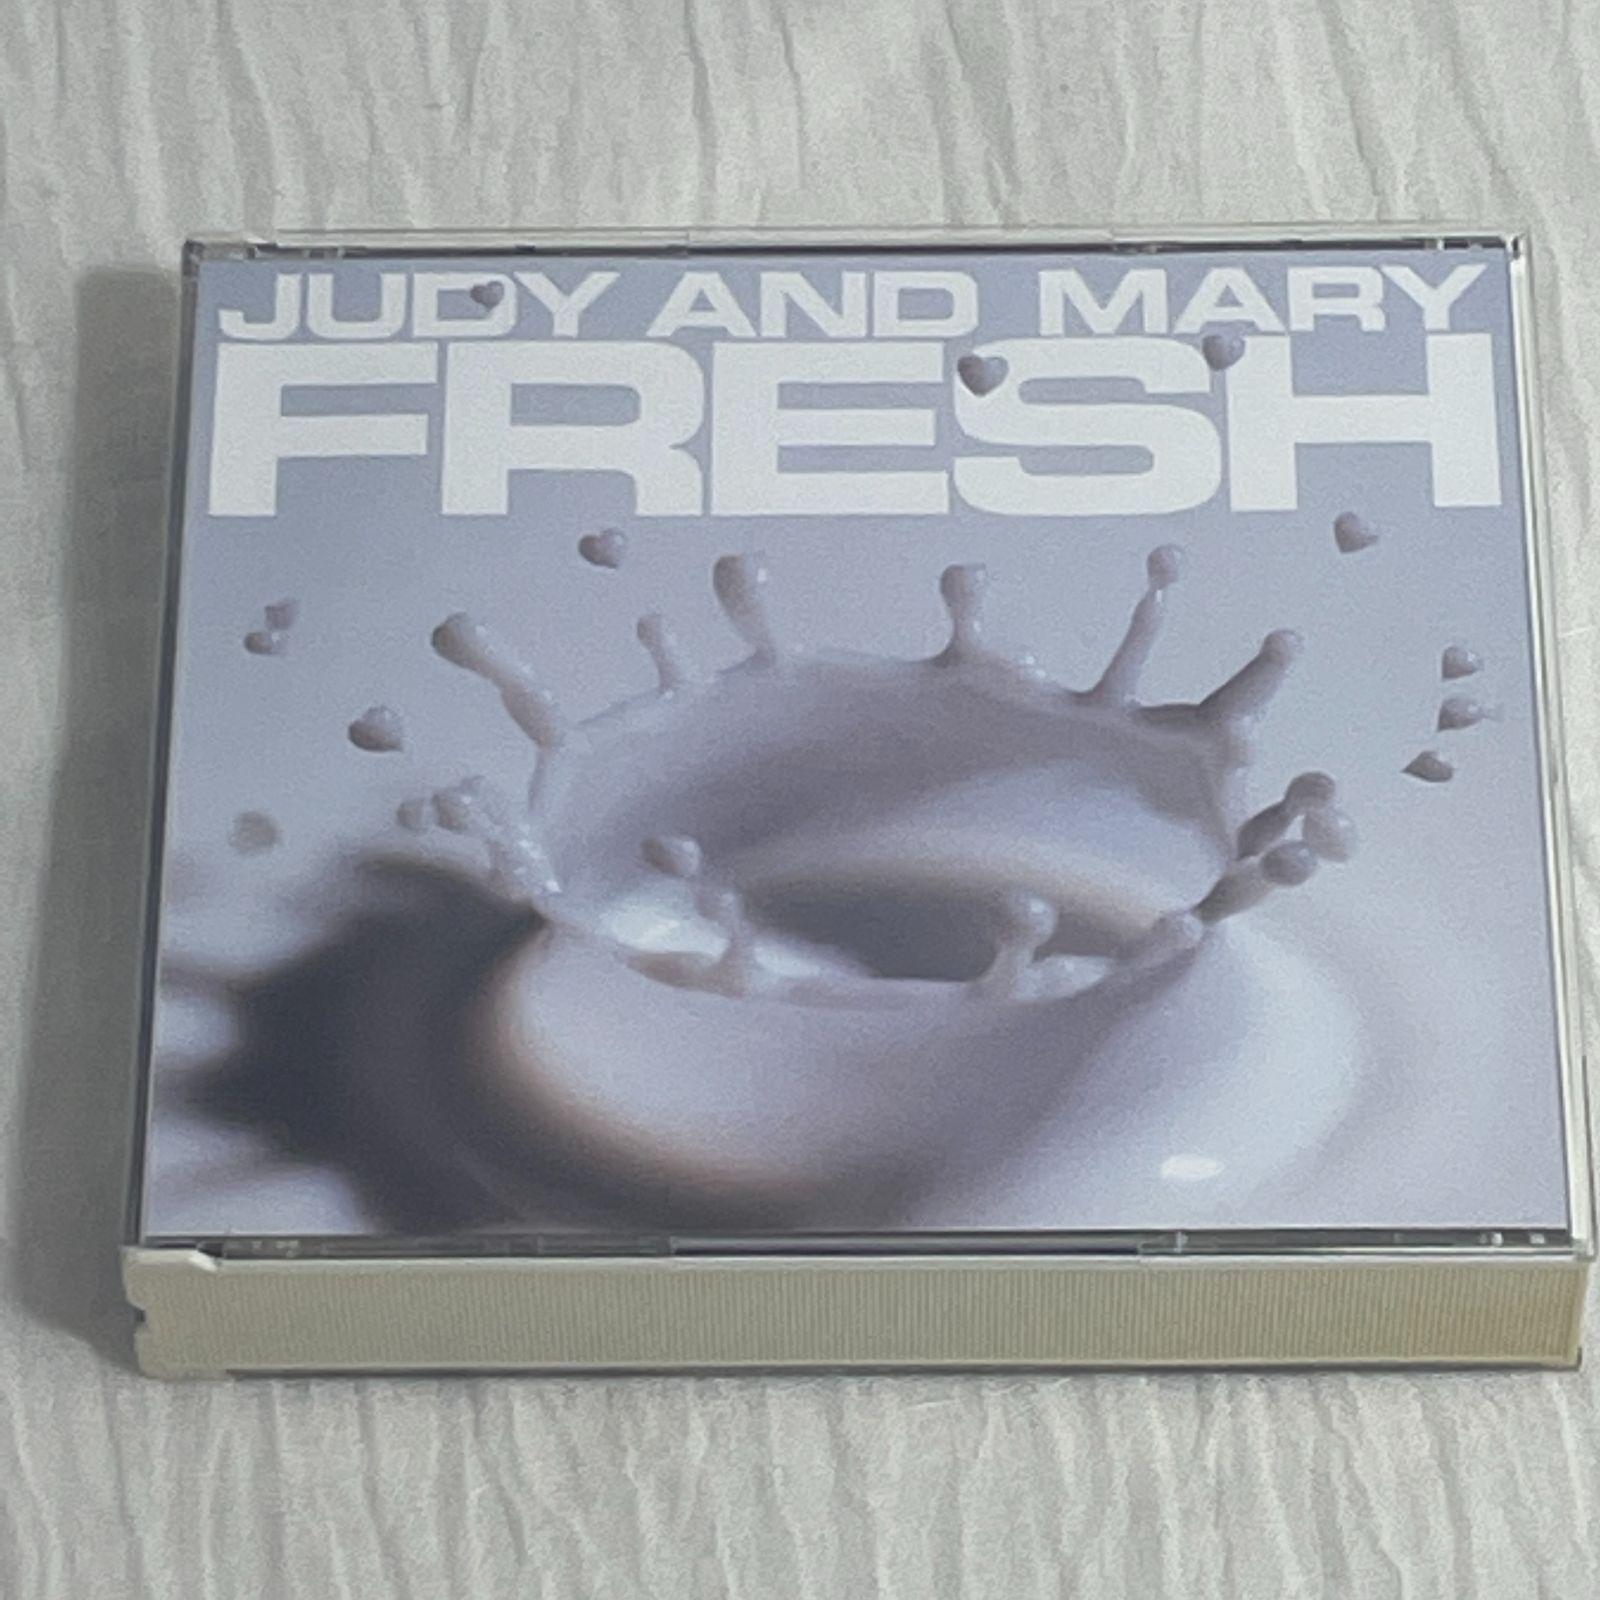 JUDY AND MARY｜COMPLETE BEST ALBUM FRESH（中古CD）｜2CD+1DVD